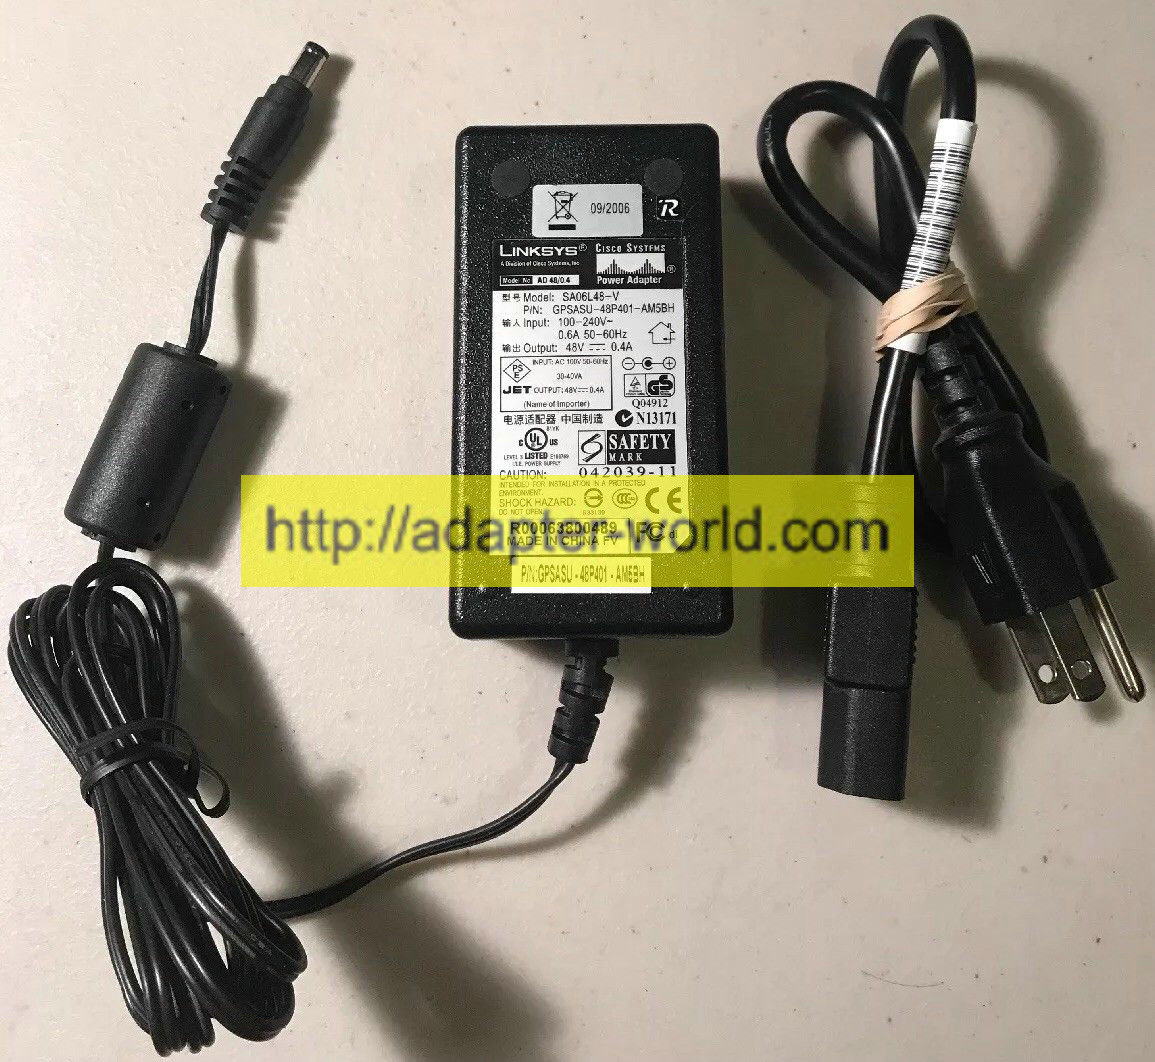 *100% Brand NEW* Linksys 48V 0.4A FOR SA06L48-V GPSASU-48P401-AM5BH AC Adapter Free shipping!